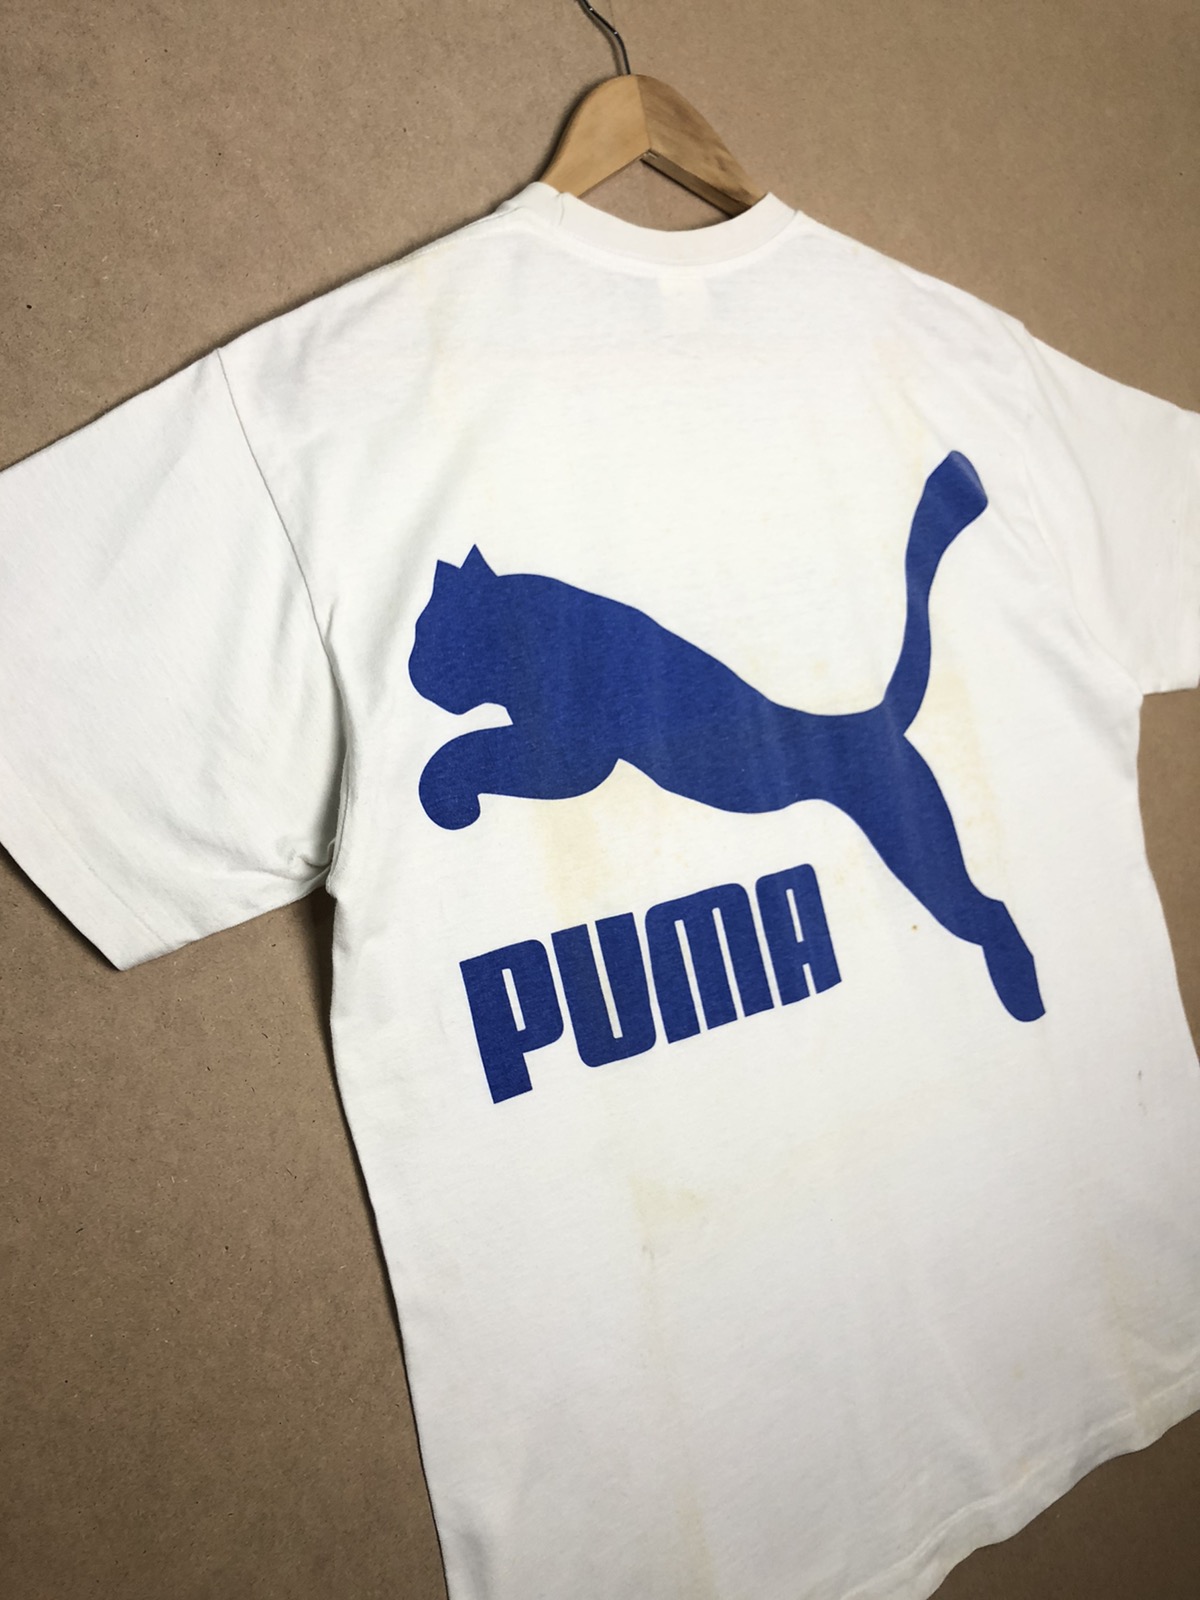 VTG 90s PUMA SHIRT AS FLUGELS WITH SPELL OUT BIG LOGO - 13